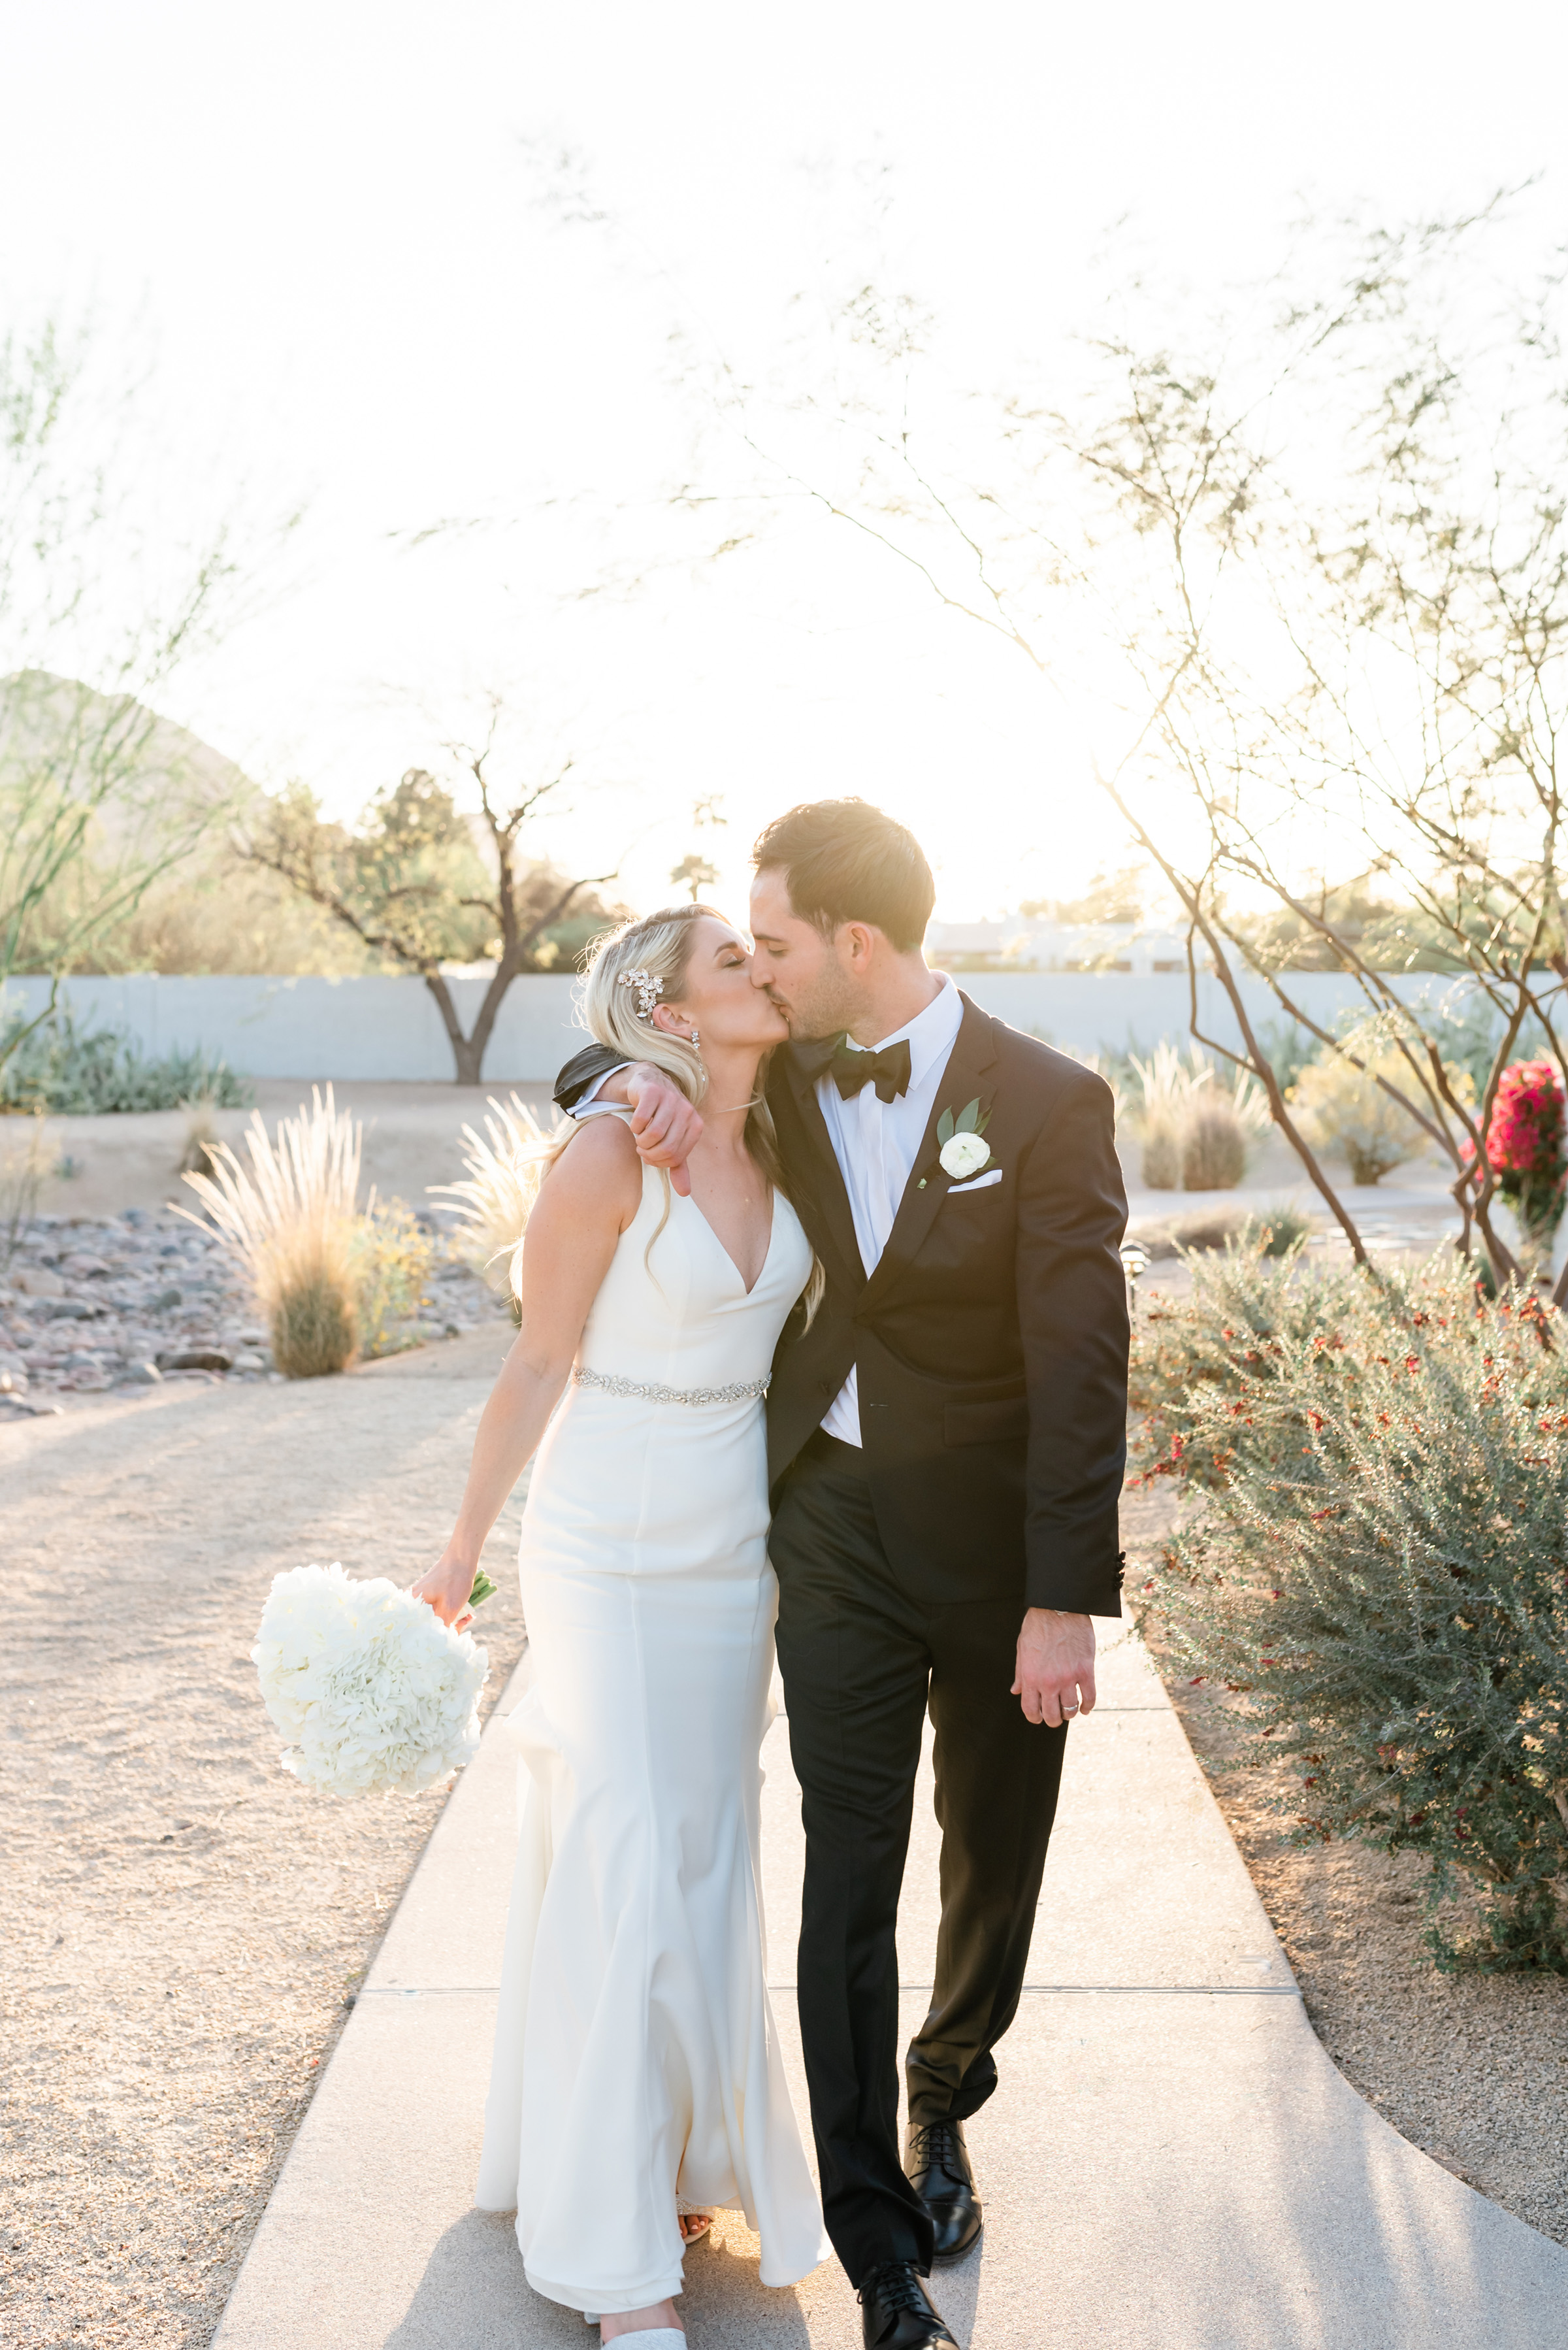 https://wantthatwedding.co.uk/wp-content/uploads/Spector_Mall_Joy-and-Ben-Photography_wedding-at-andaz-scottsdale-resort-courtney-charlie-selections-87.jpg